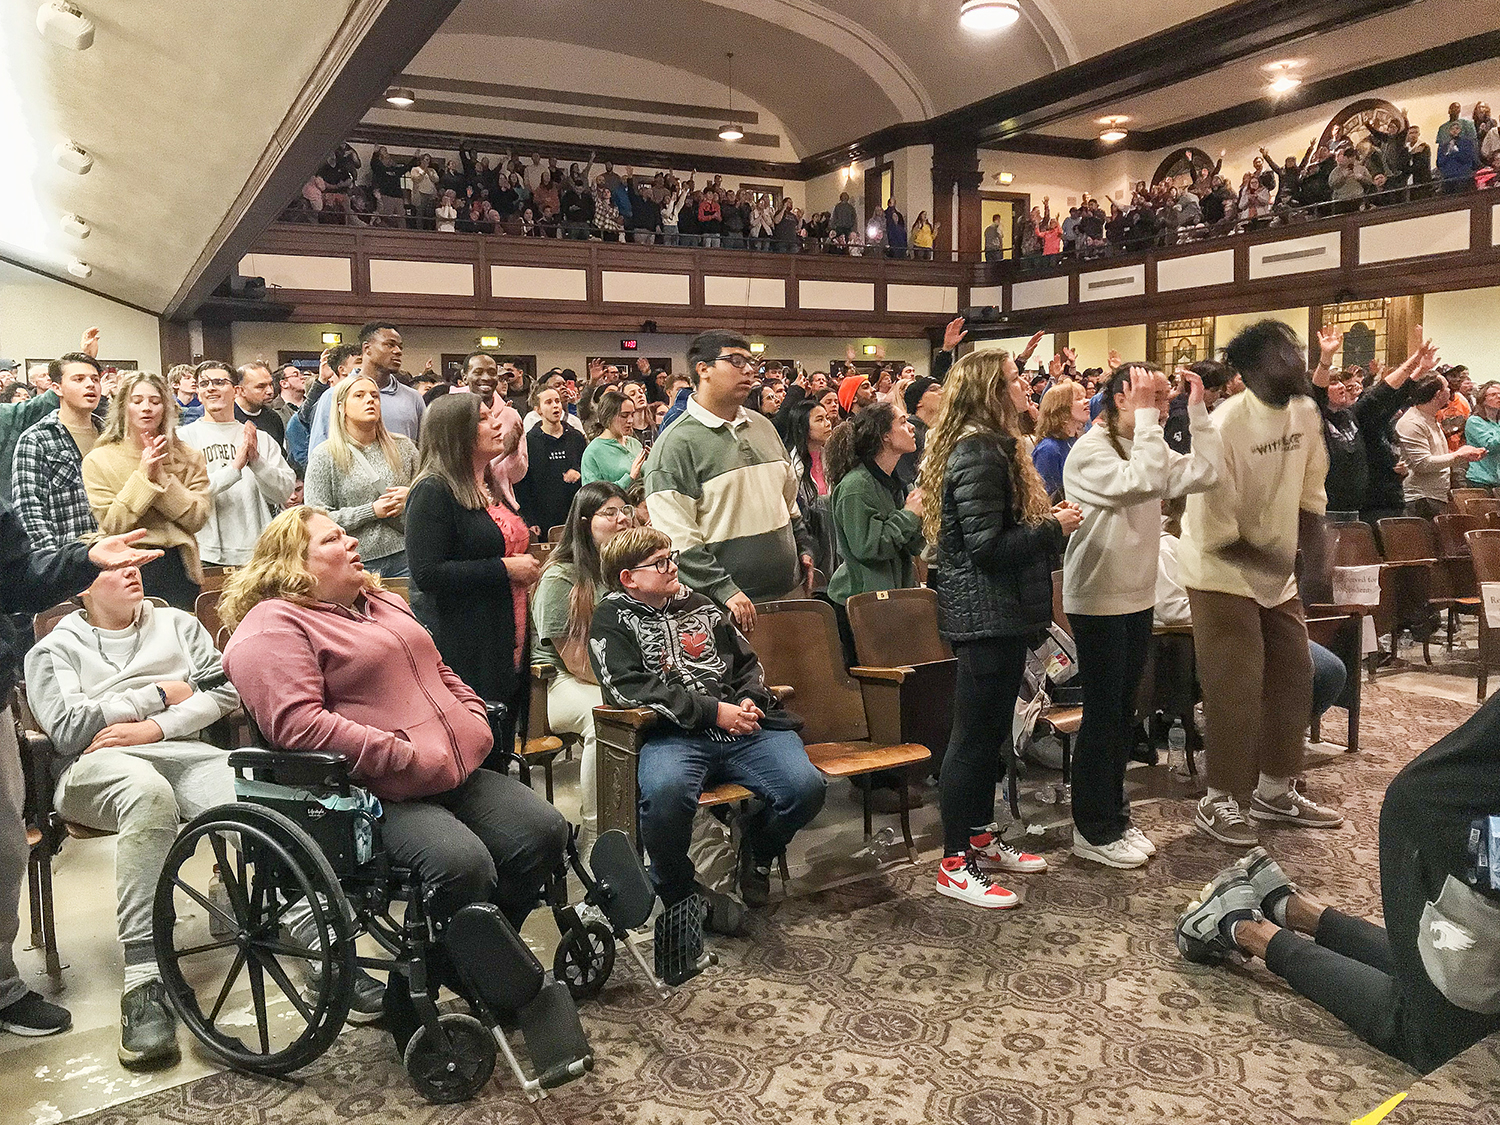 People join together to worship inside Hughes Auditorium. Photo by Fiona Morgan